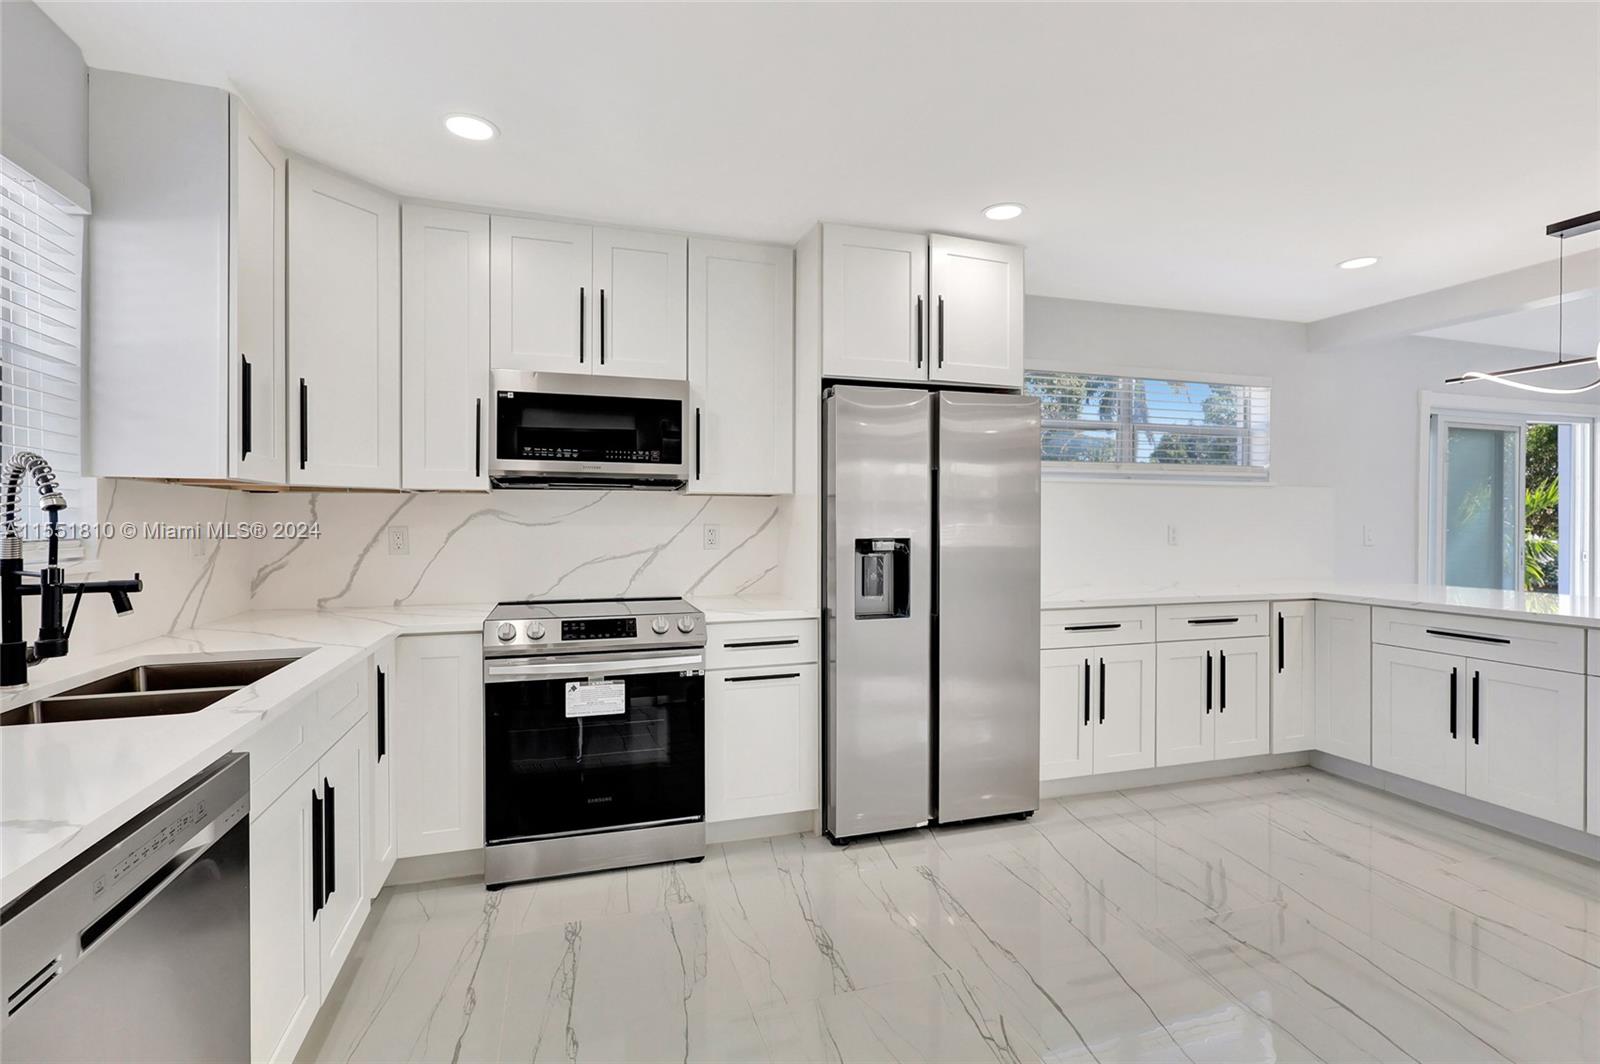 a kitchen with stainless steel appliances granite countertop a stove top oven a refrigerator and white cabinets